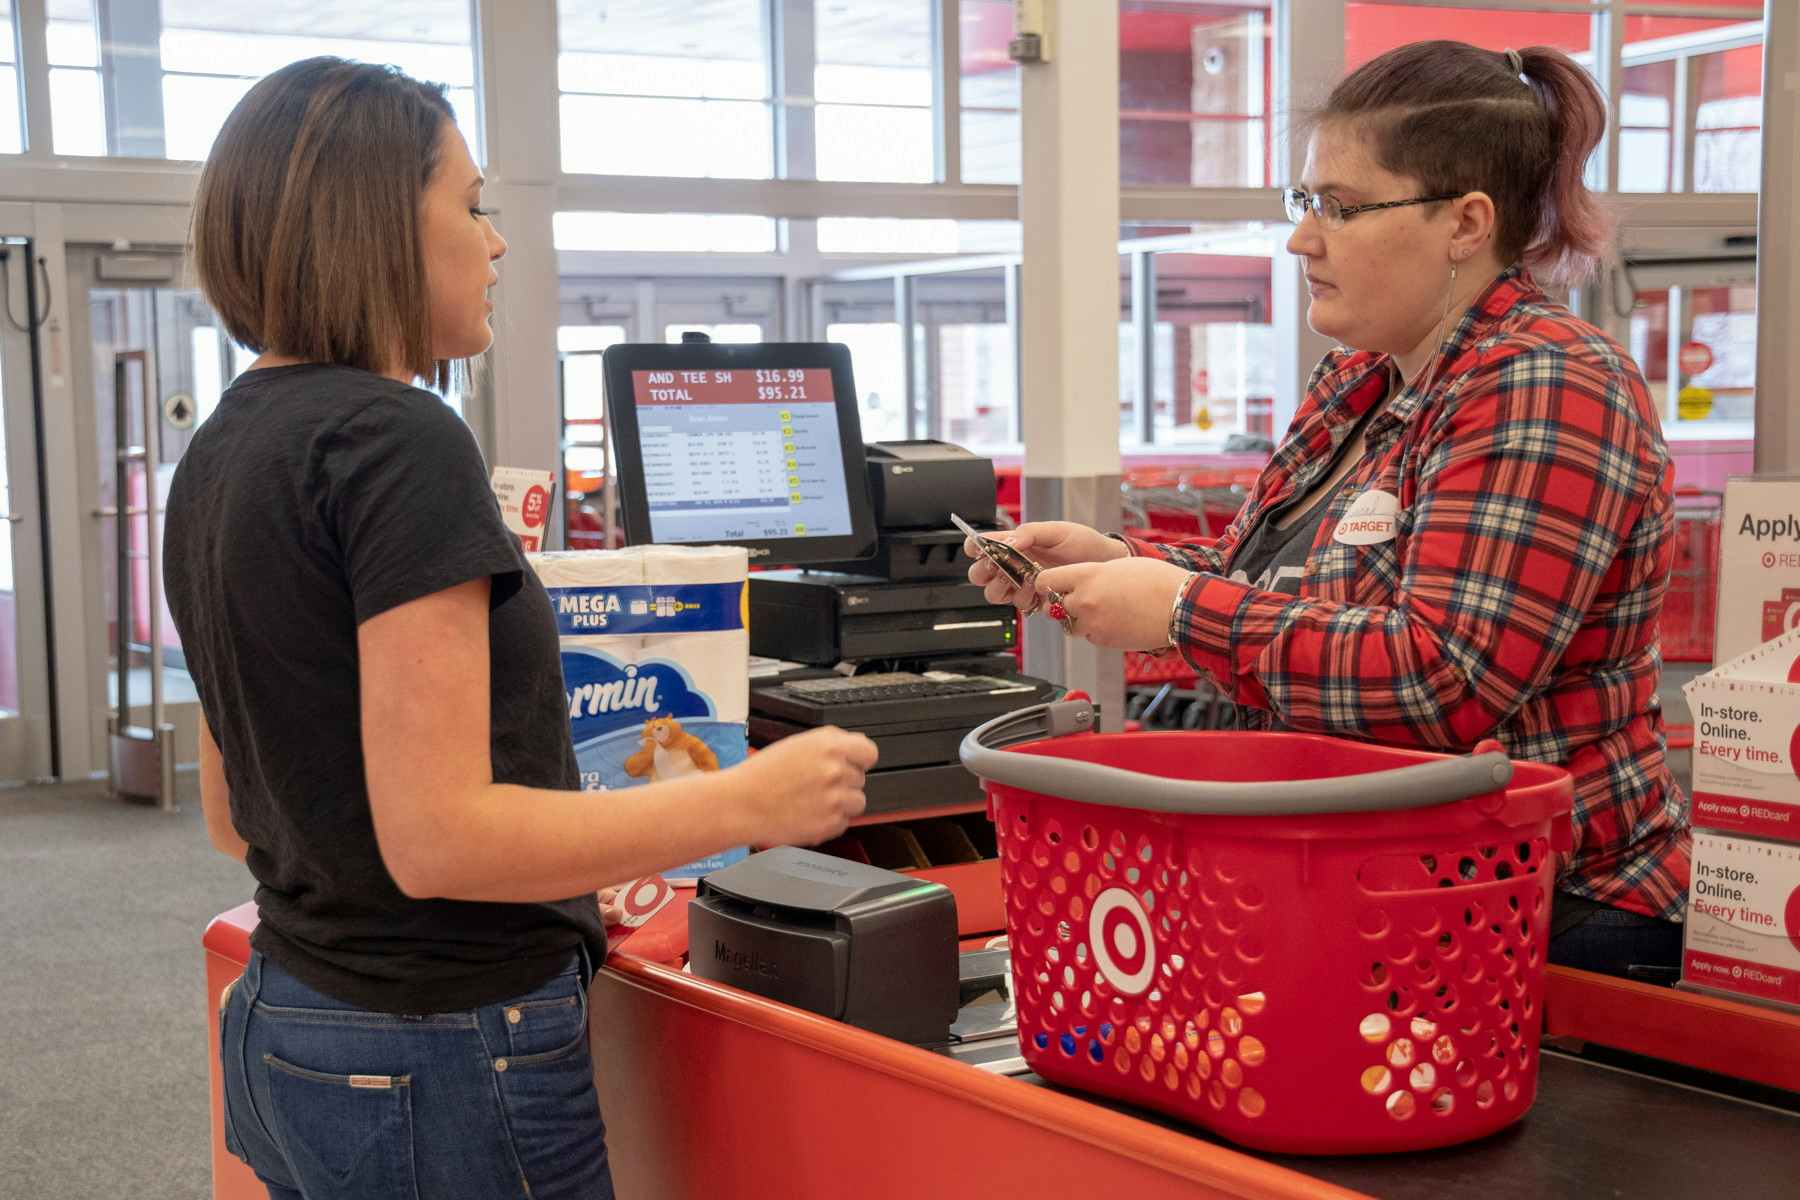 Ask for a price adjustment if you didn't realize you had a Cartwheel offer when you made your purchase.